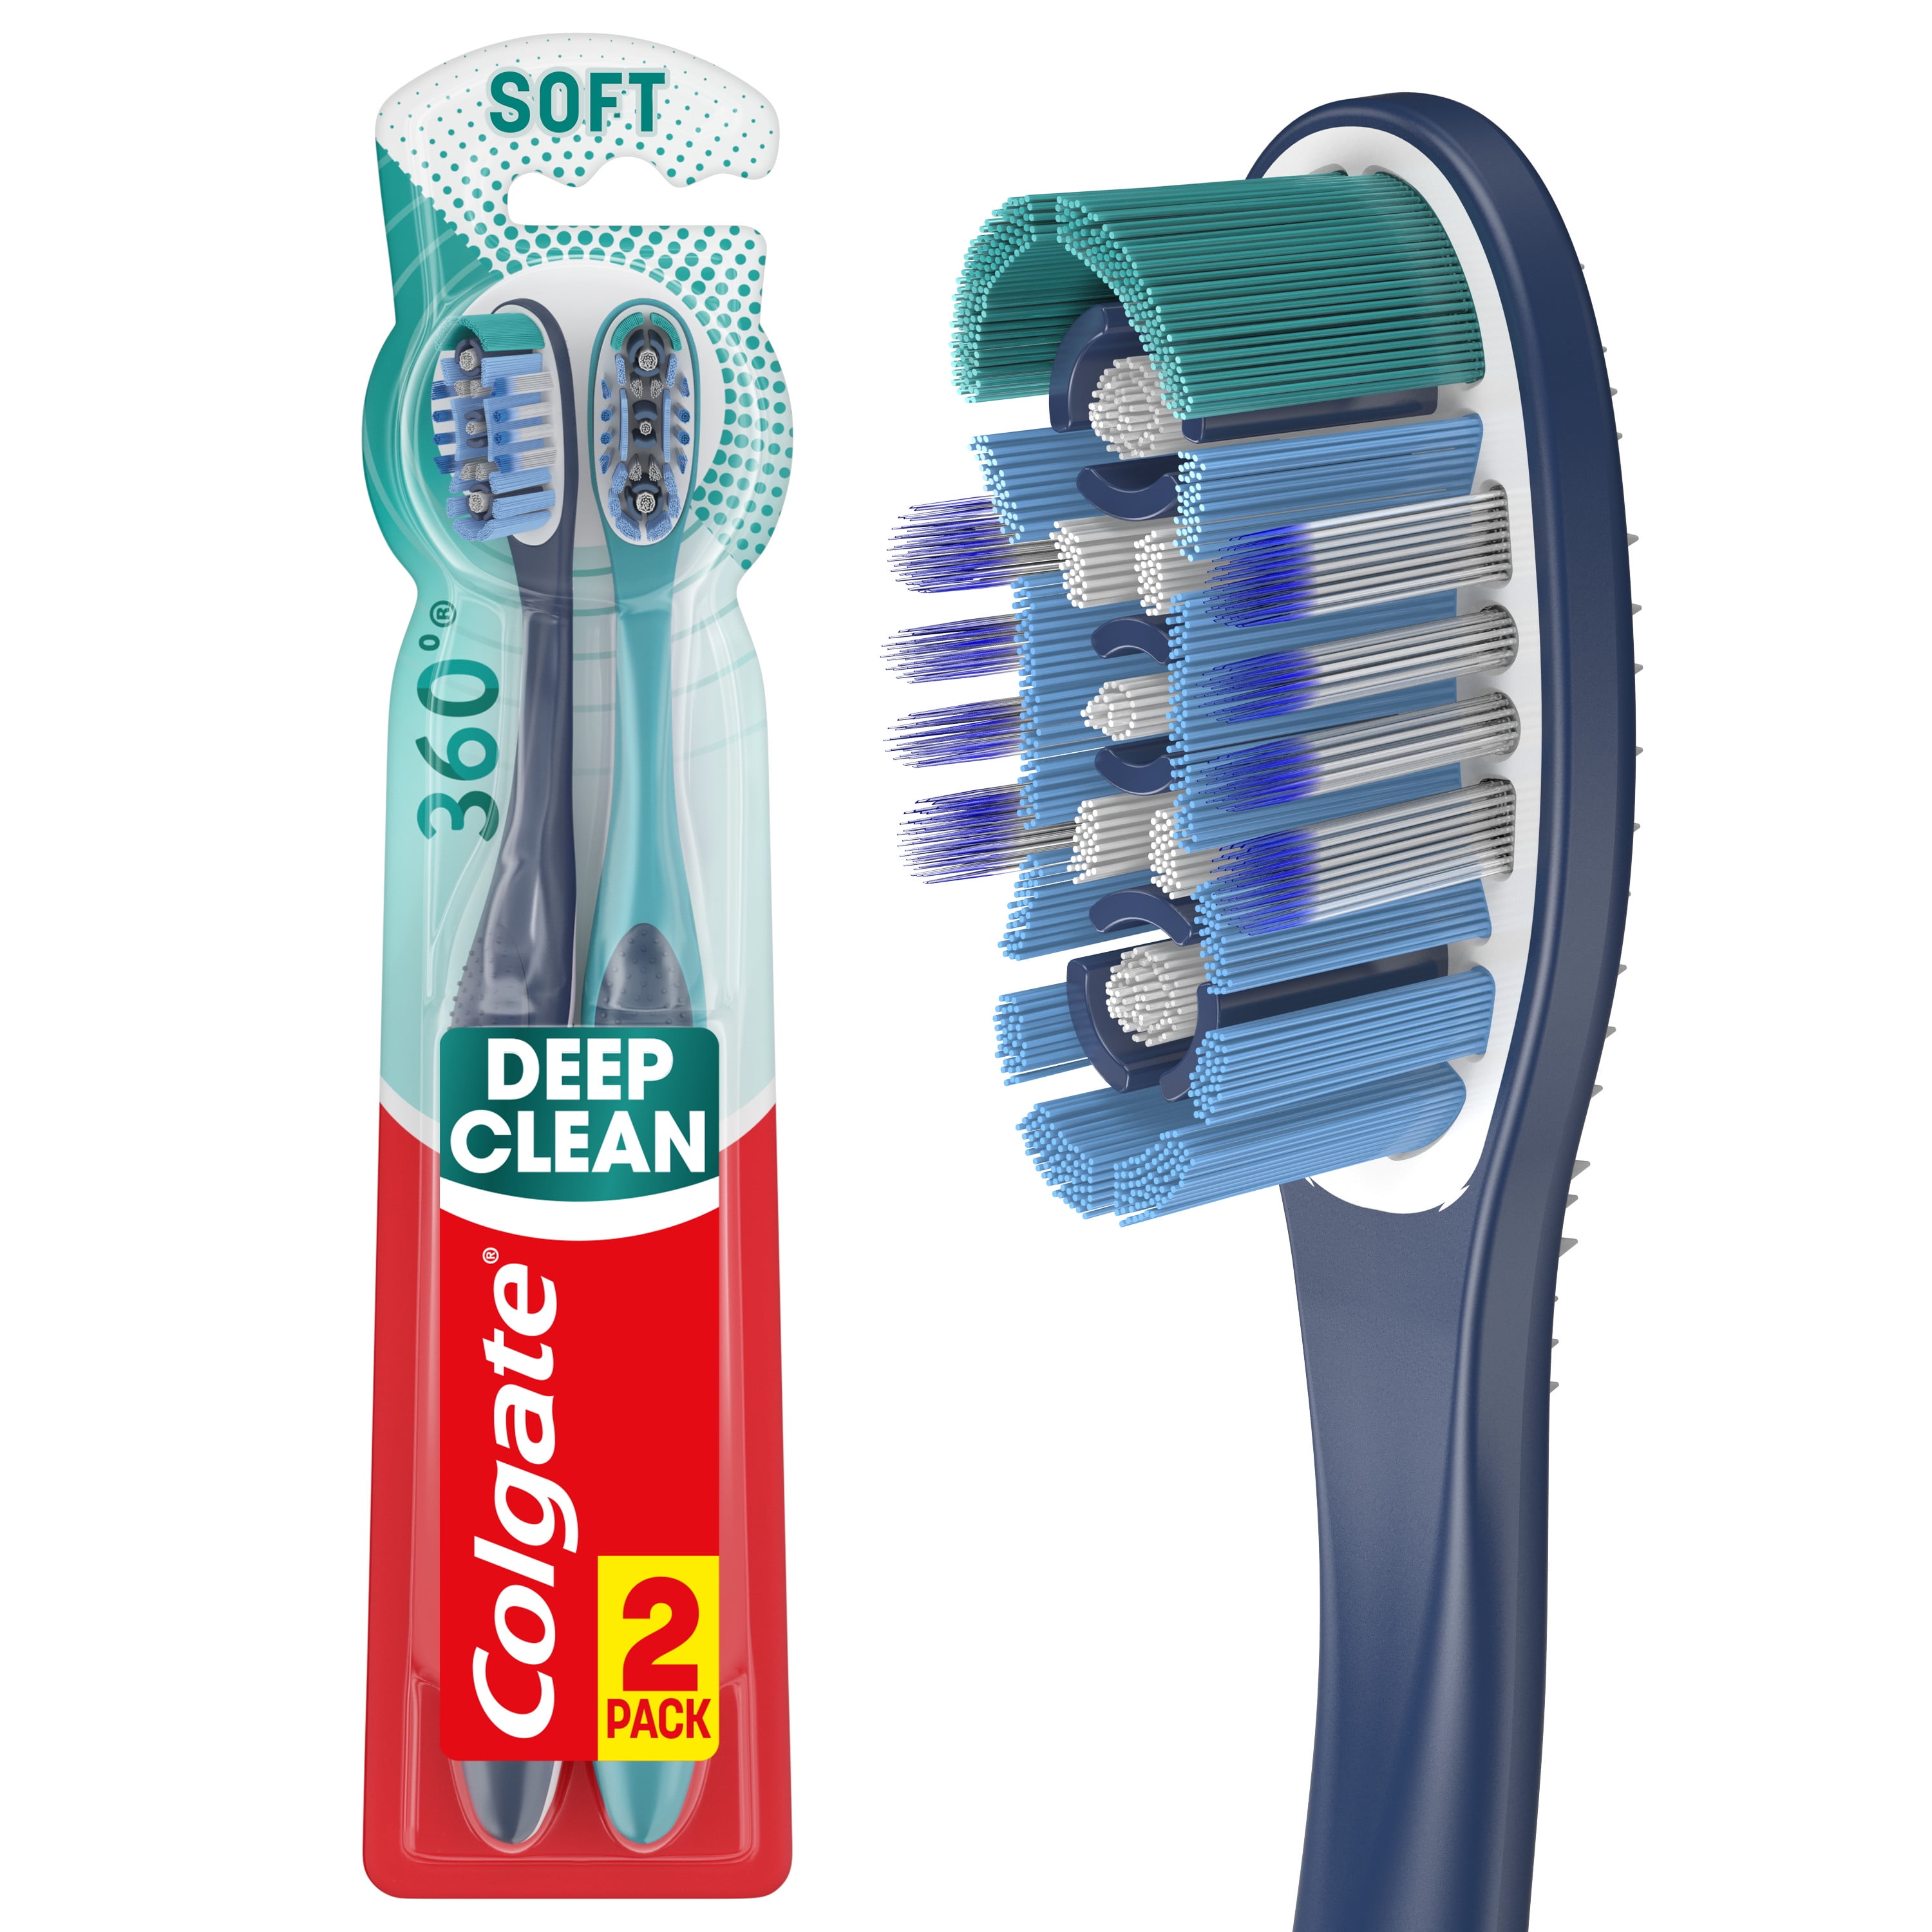 Save on Colgate 360 Whole Mouth Clean Toothbrush Soft Order Online Delivery